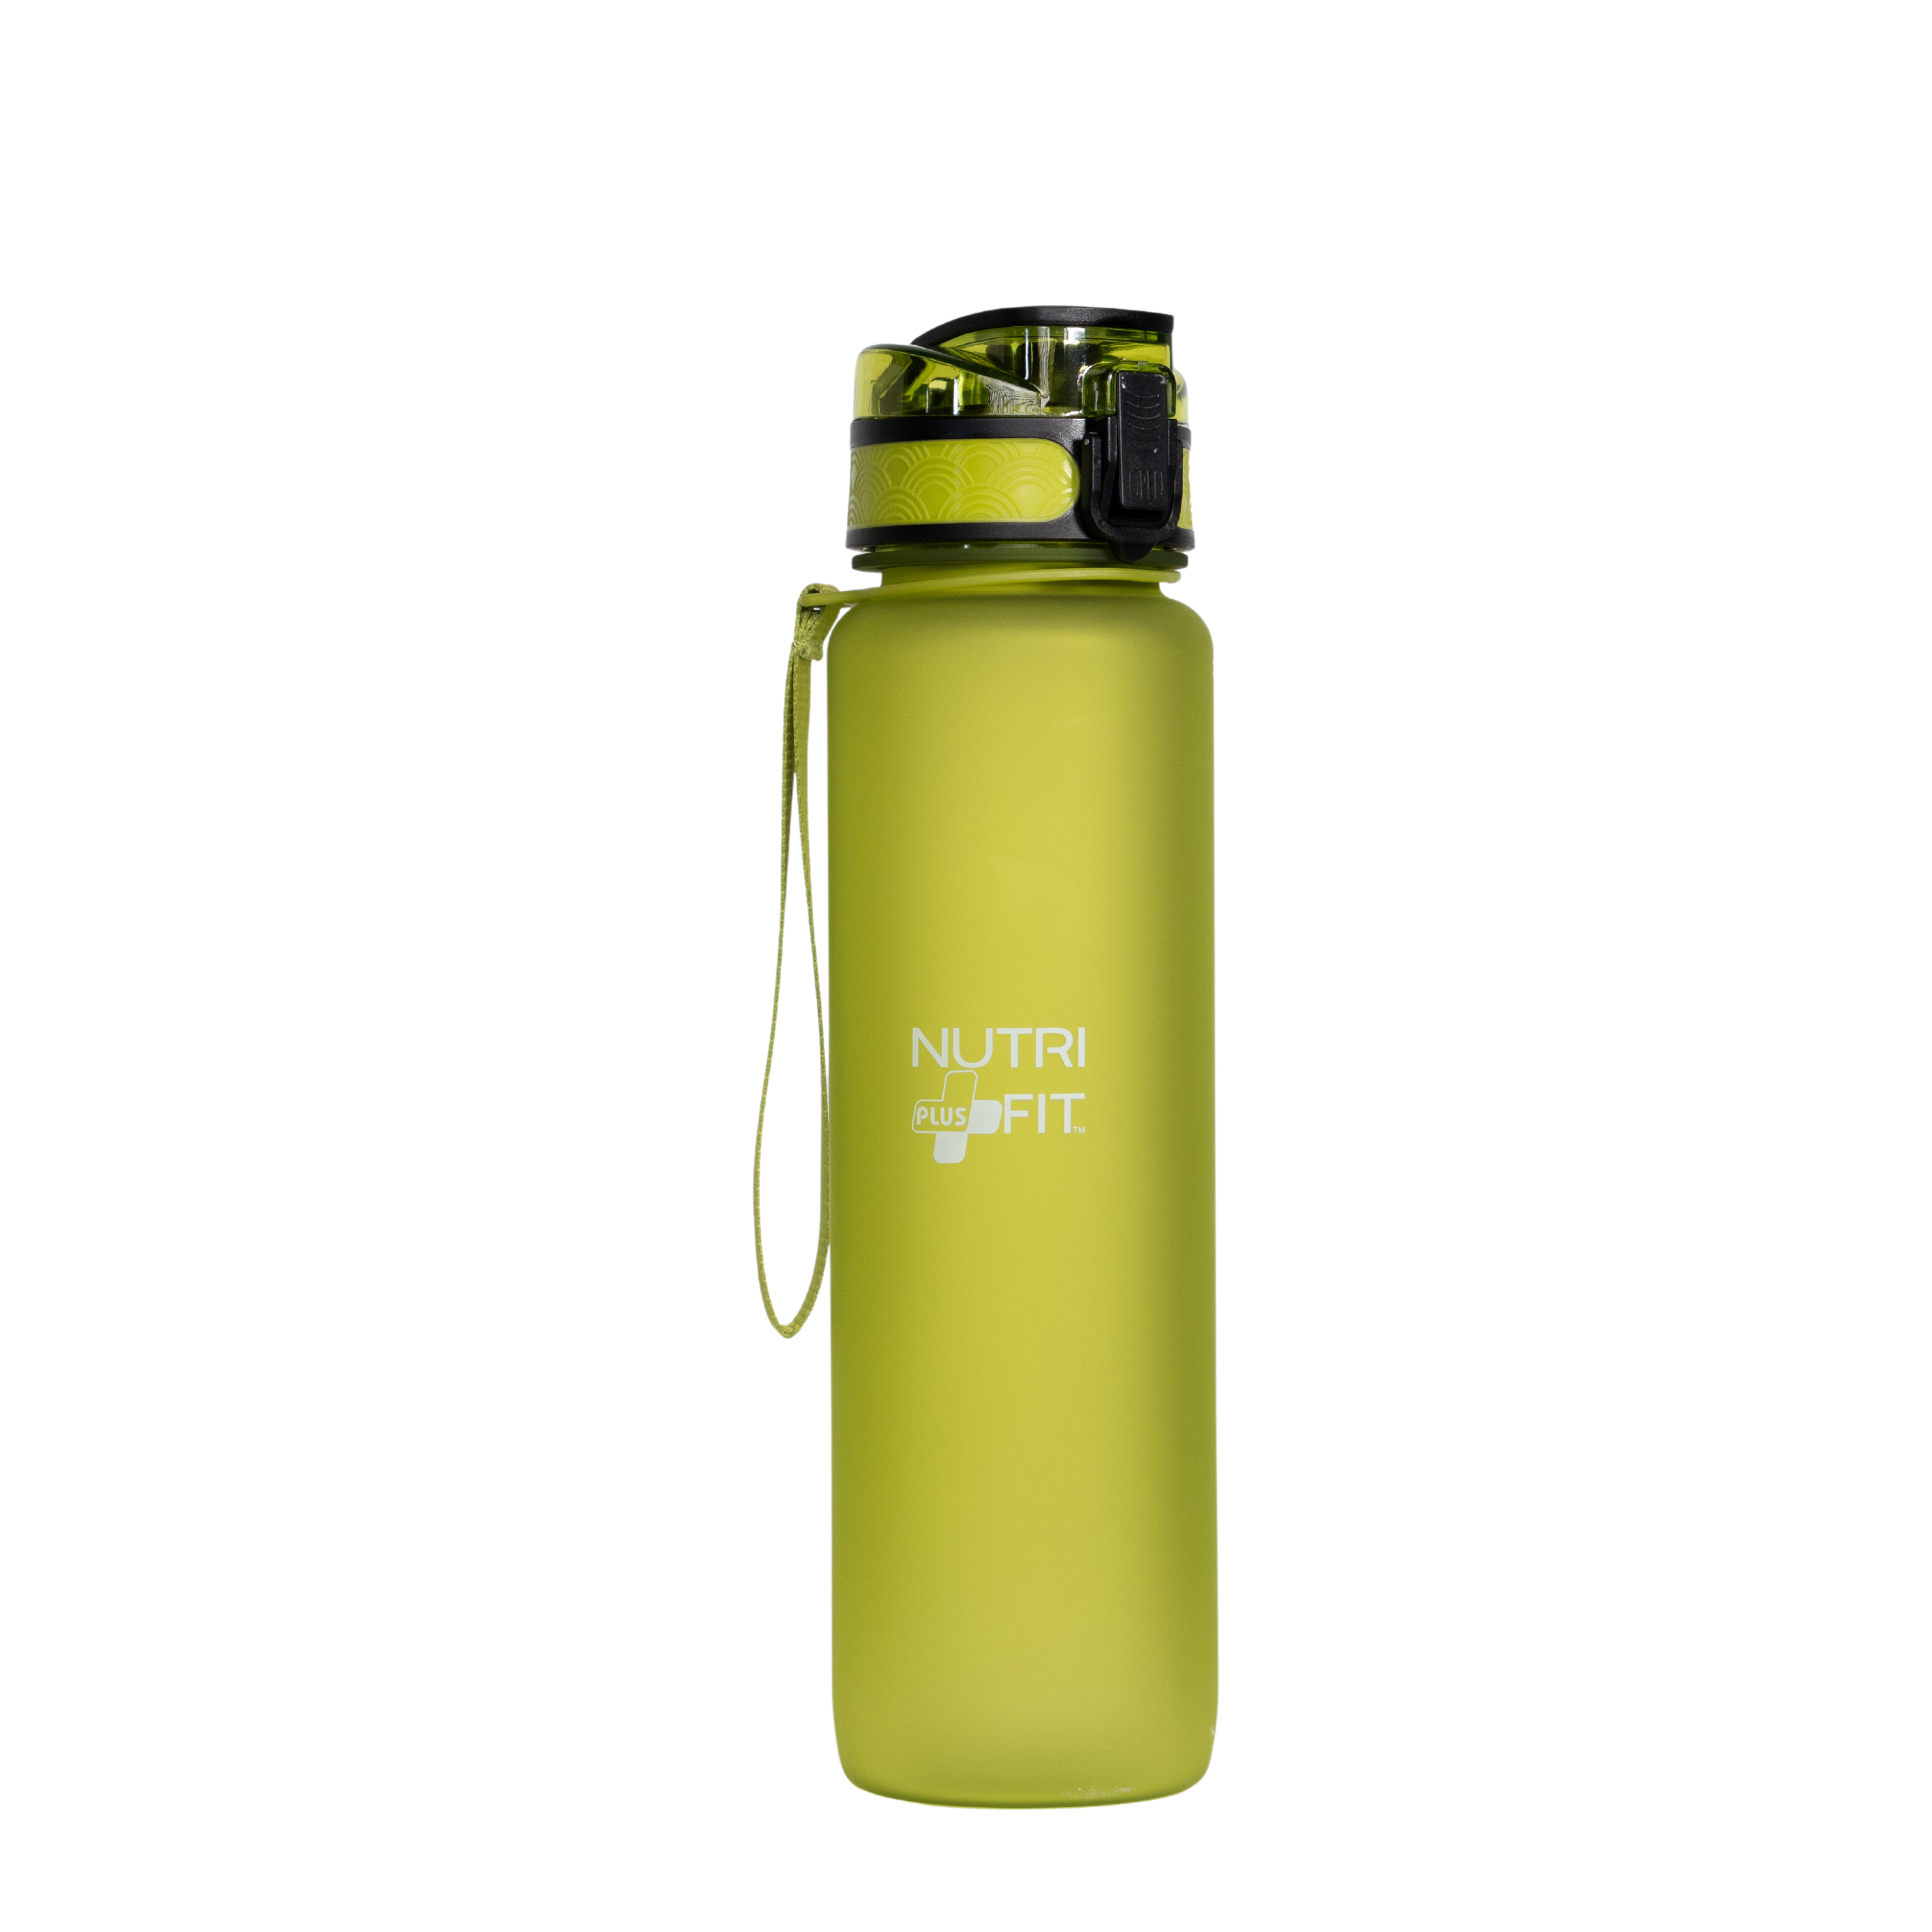 NutriFit Plus Hydration Water Bottle for everyday use 32oz - BPA Free - Leak Proof System - Time Markers - Multi Colors